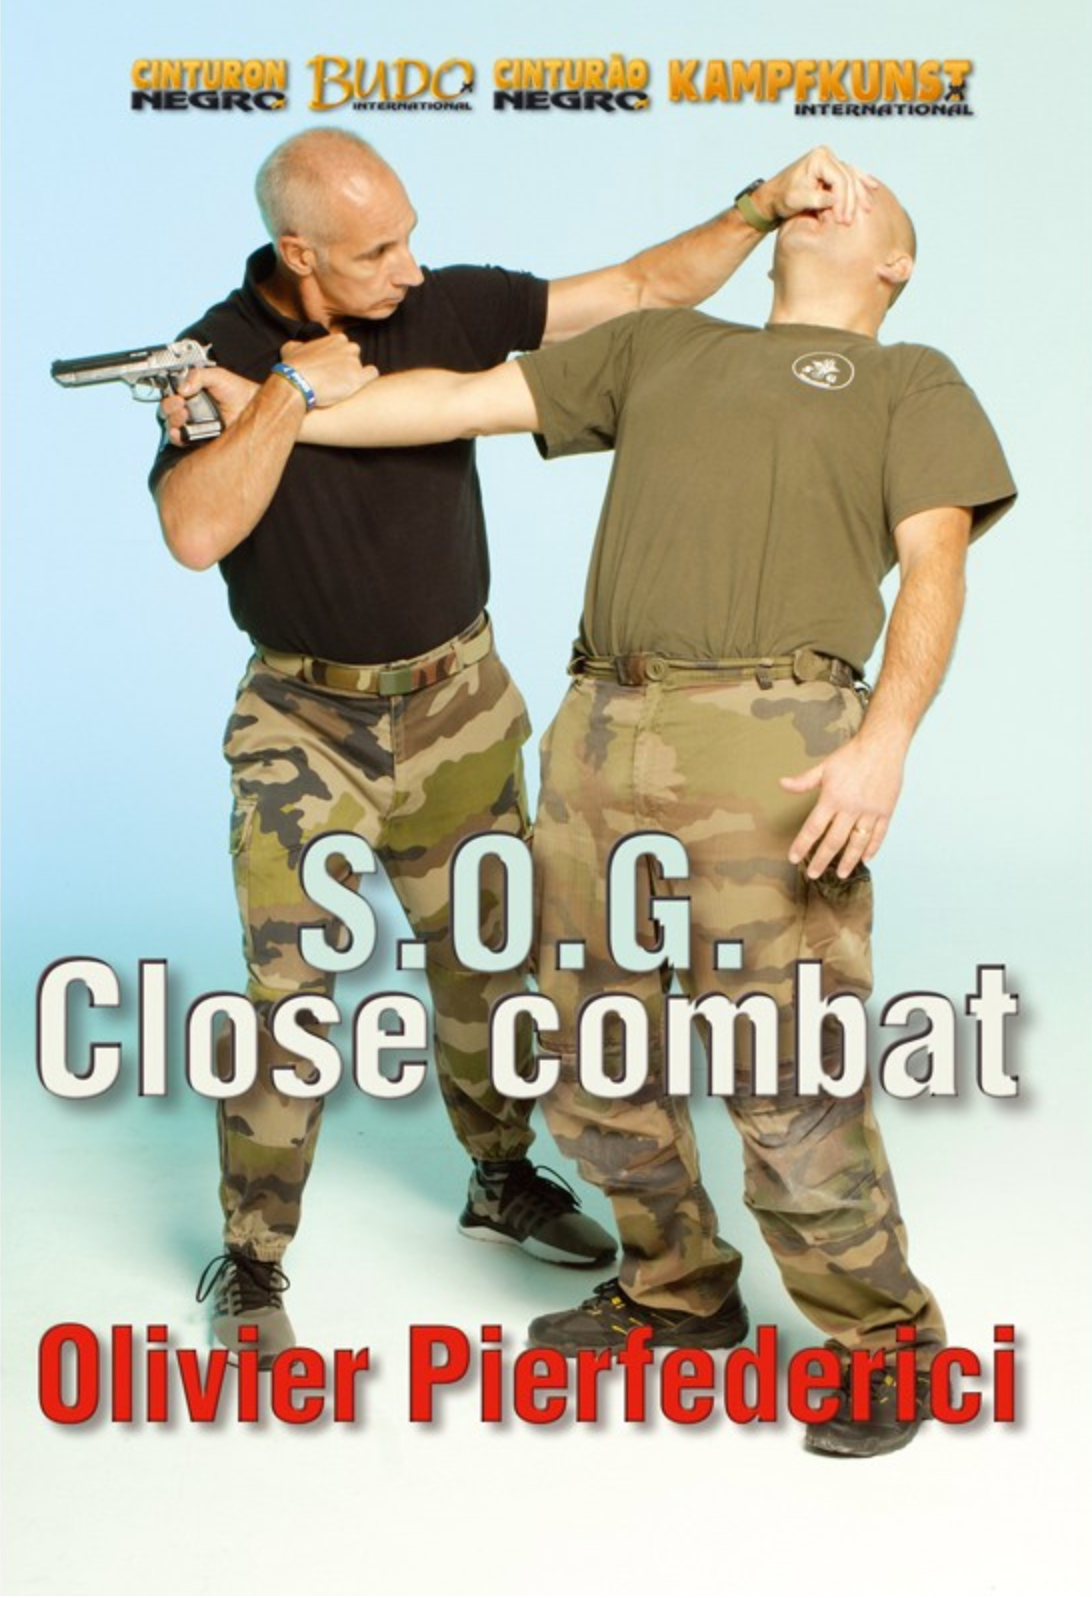 SOG Real Close Combat Vol 7 DVD by Olivier Pierfederici - Budovideos Inc